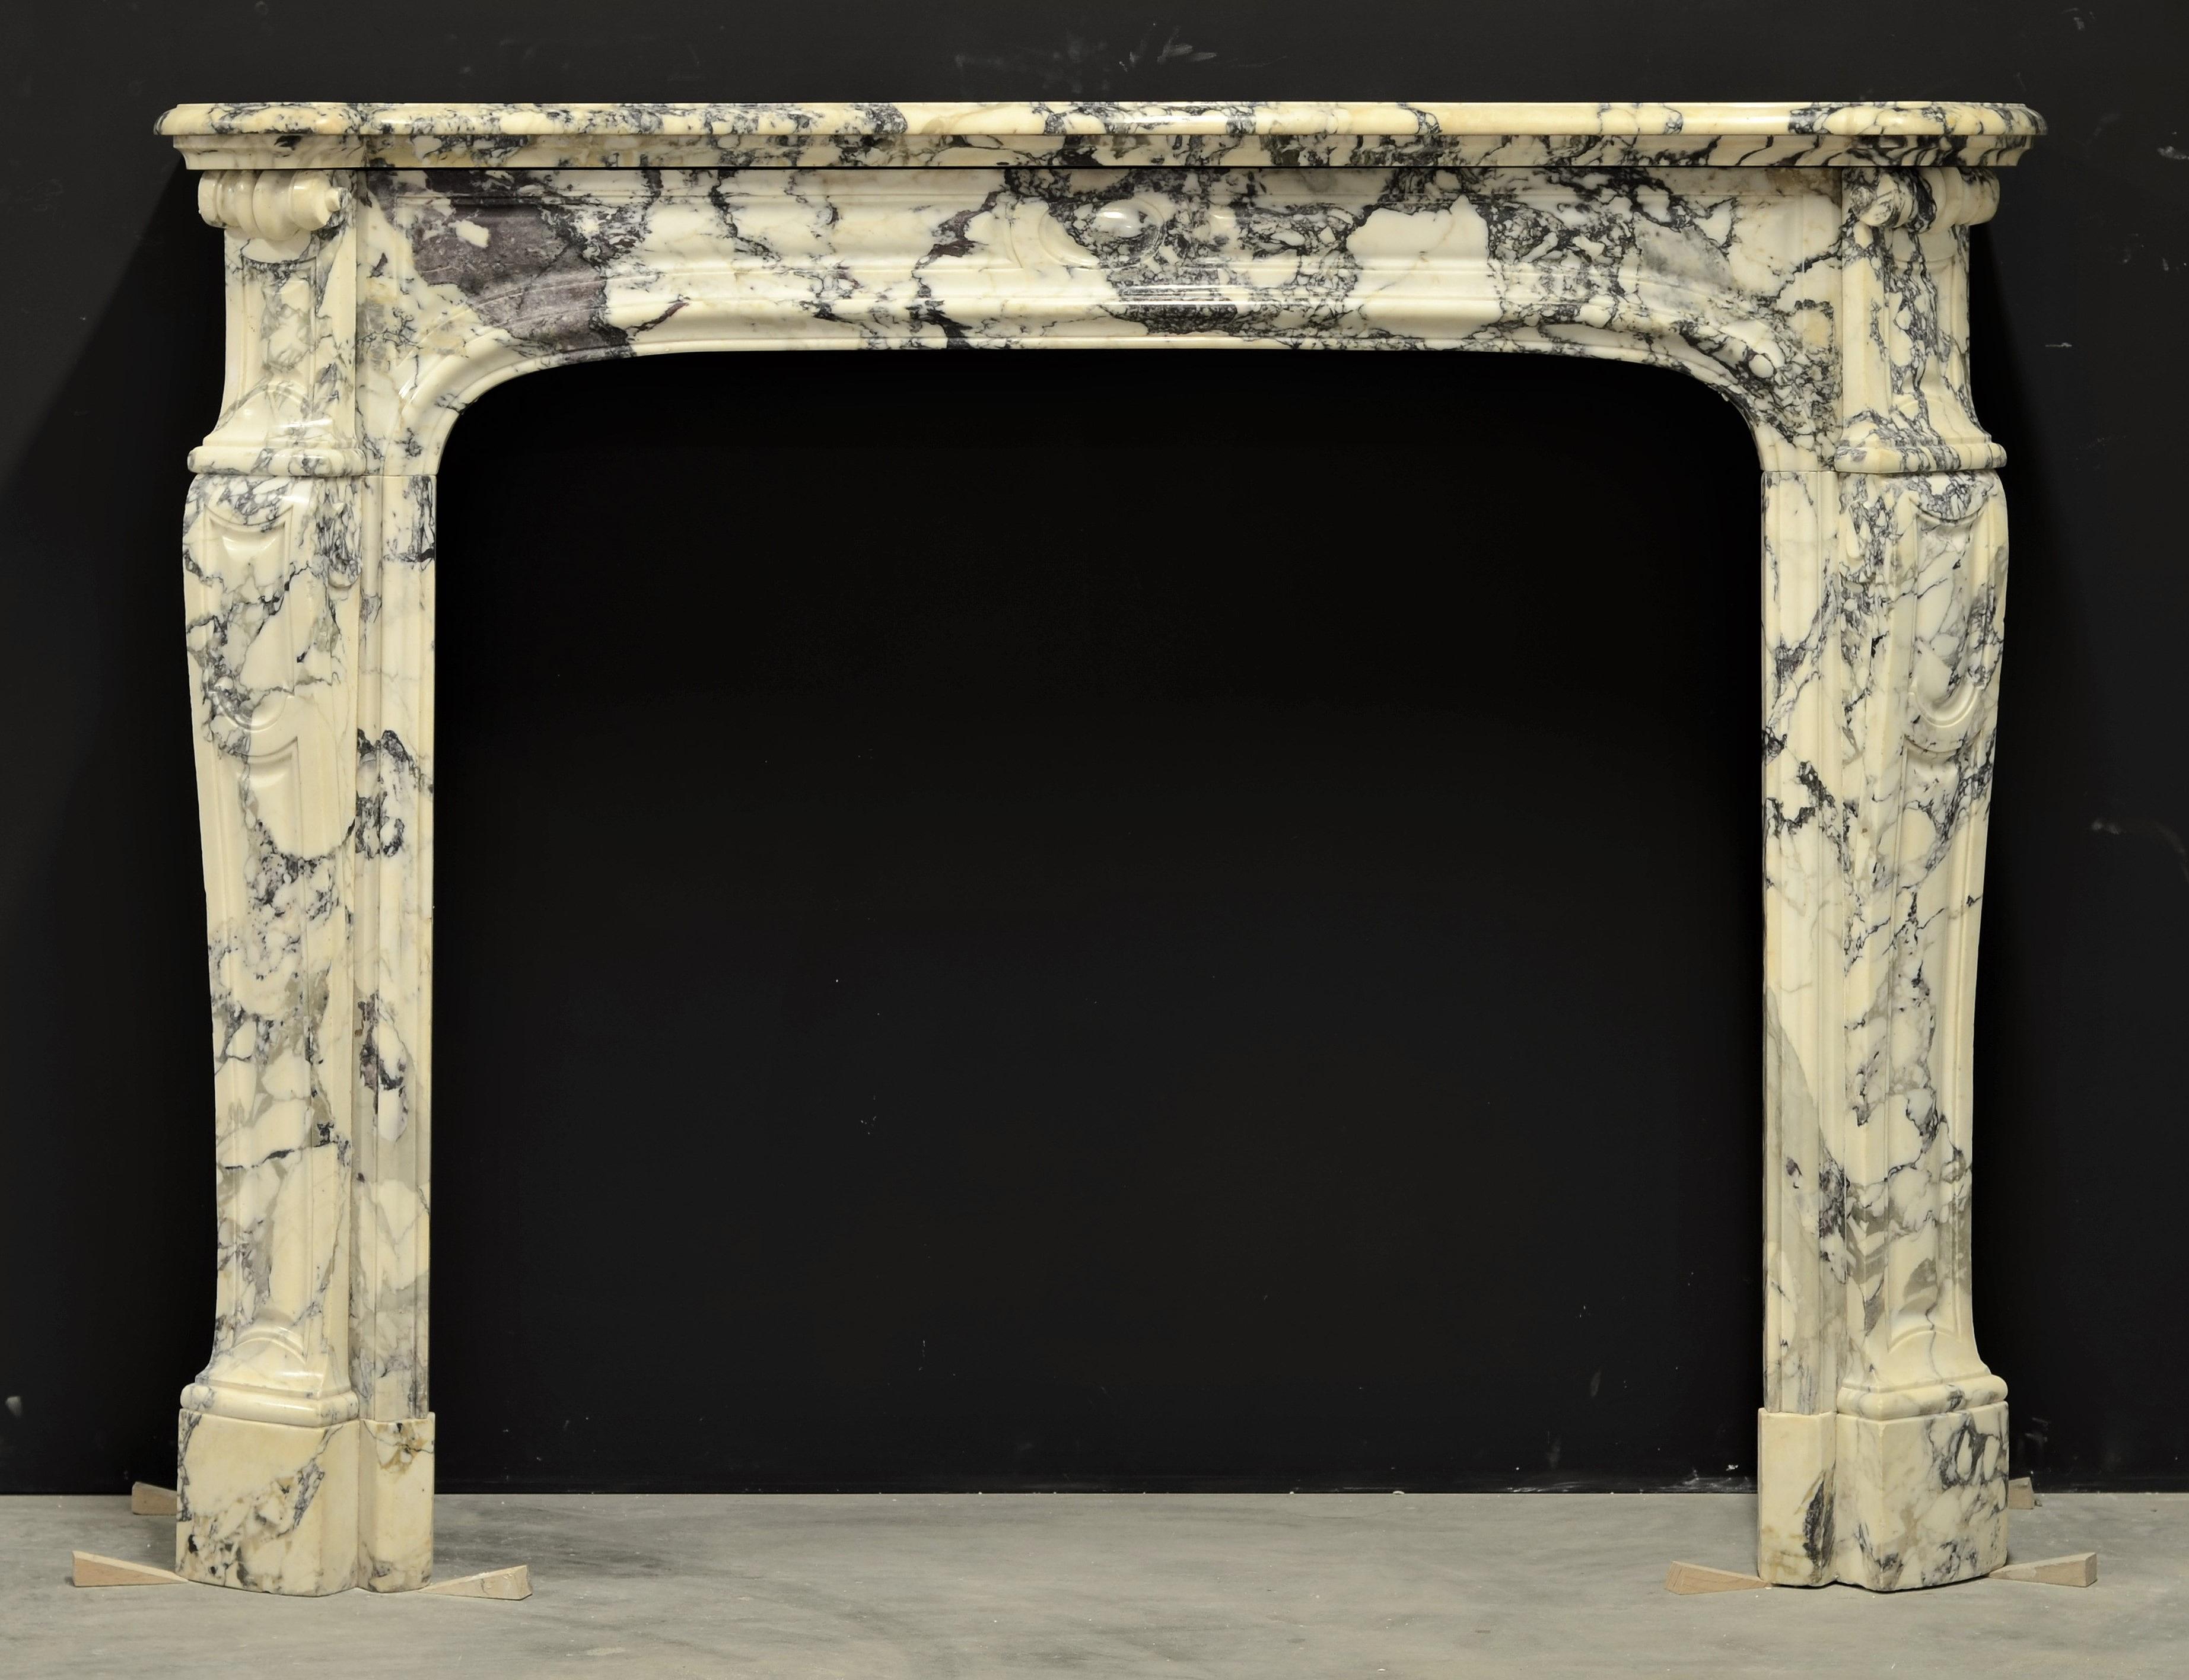 Paonazetto Pompadour Fireplace Mantel
Superb French Pompadour style Louis XV fireplace mantel executed in beautiful Paonazetto breche marble.
The soft toned marble combined with the hard veins makes this a true jaw-dropper.
Great usable